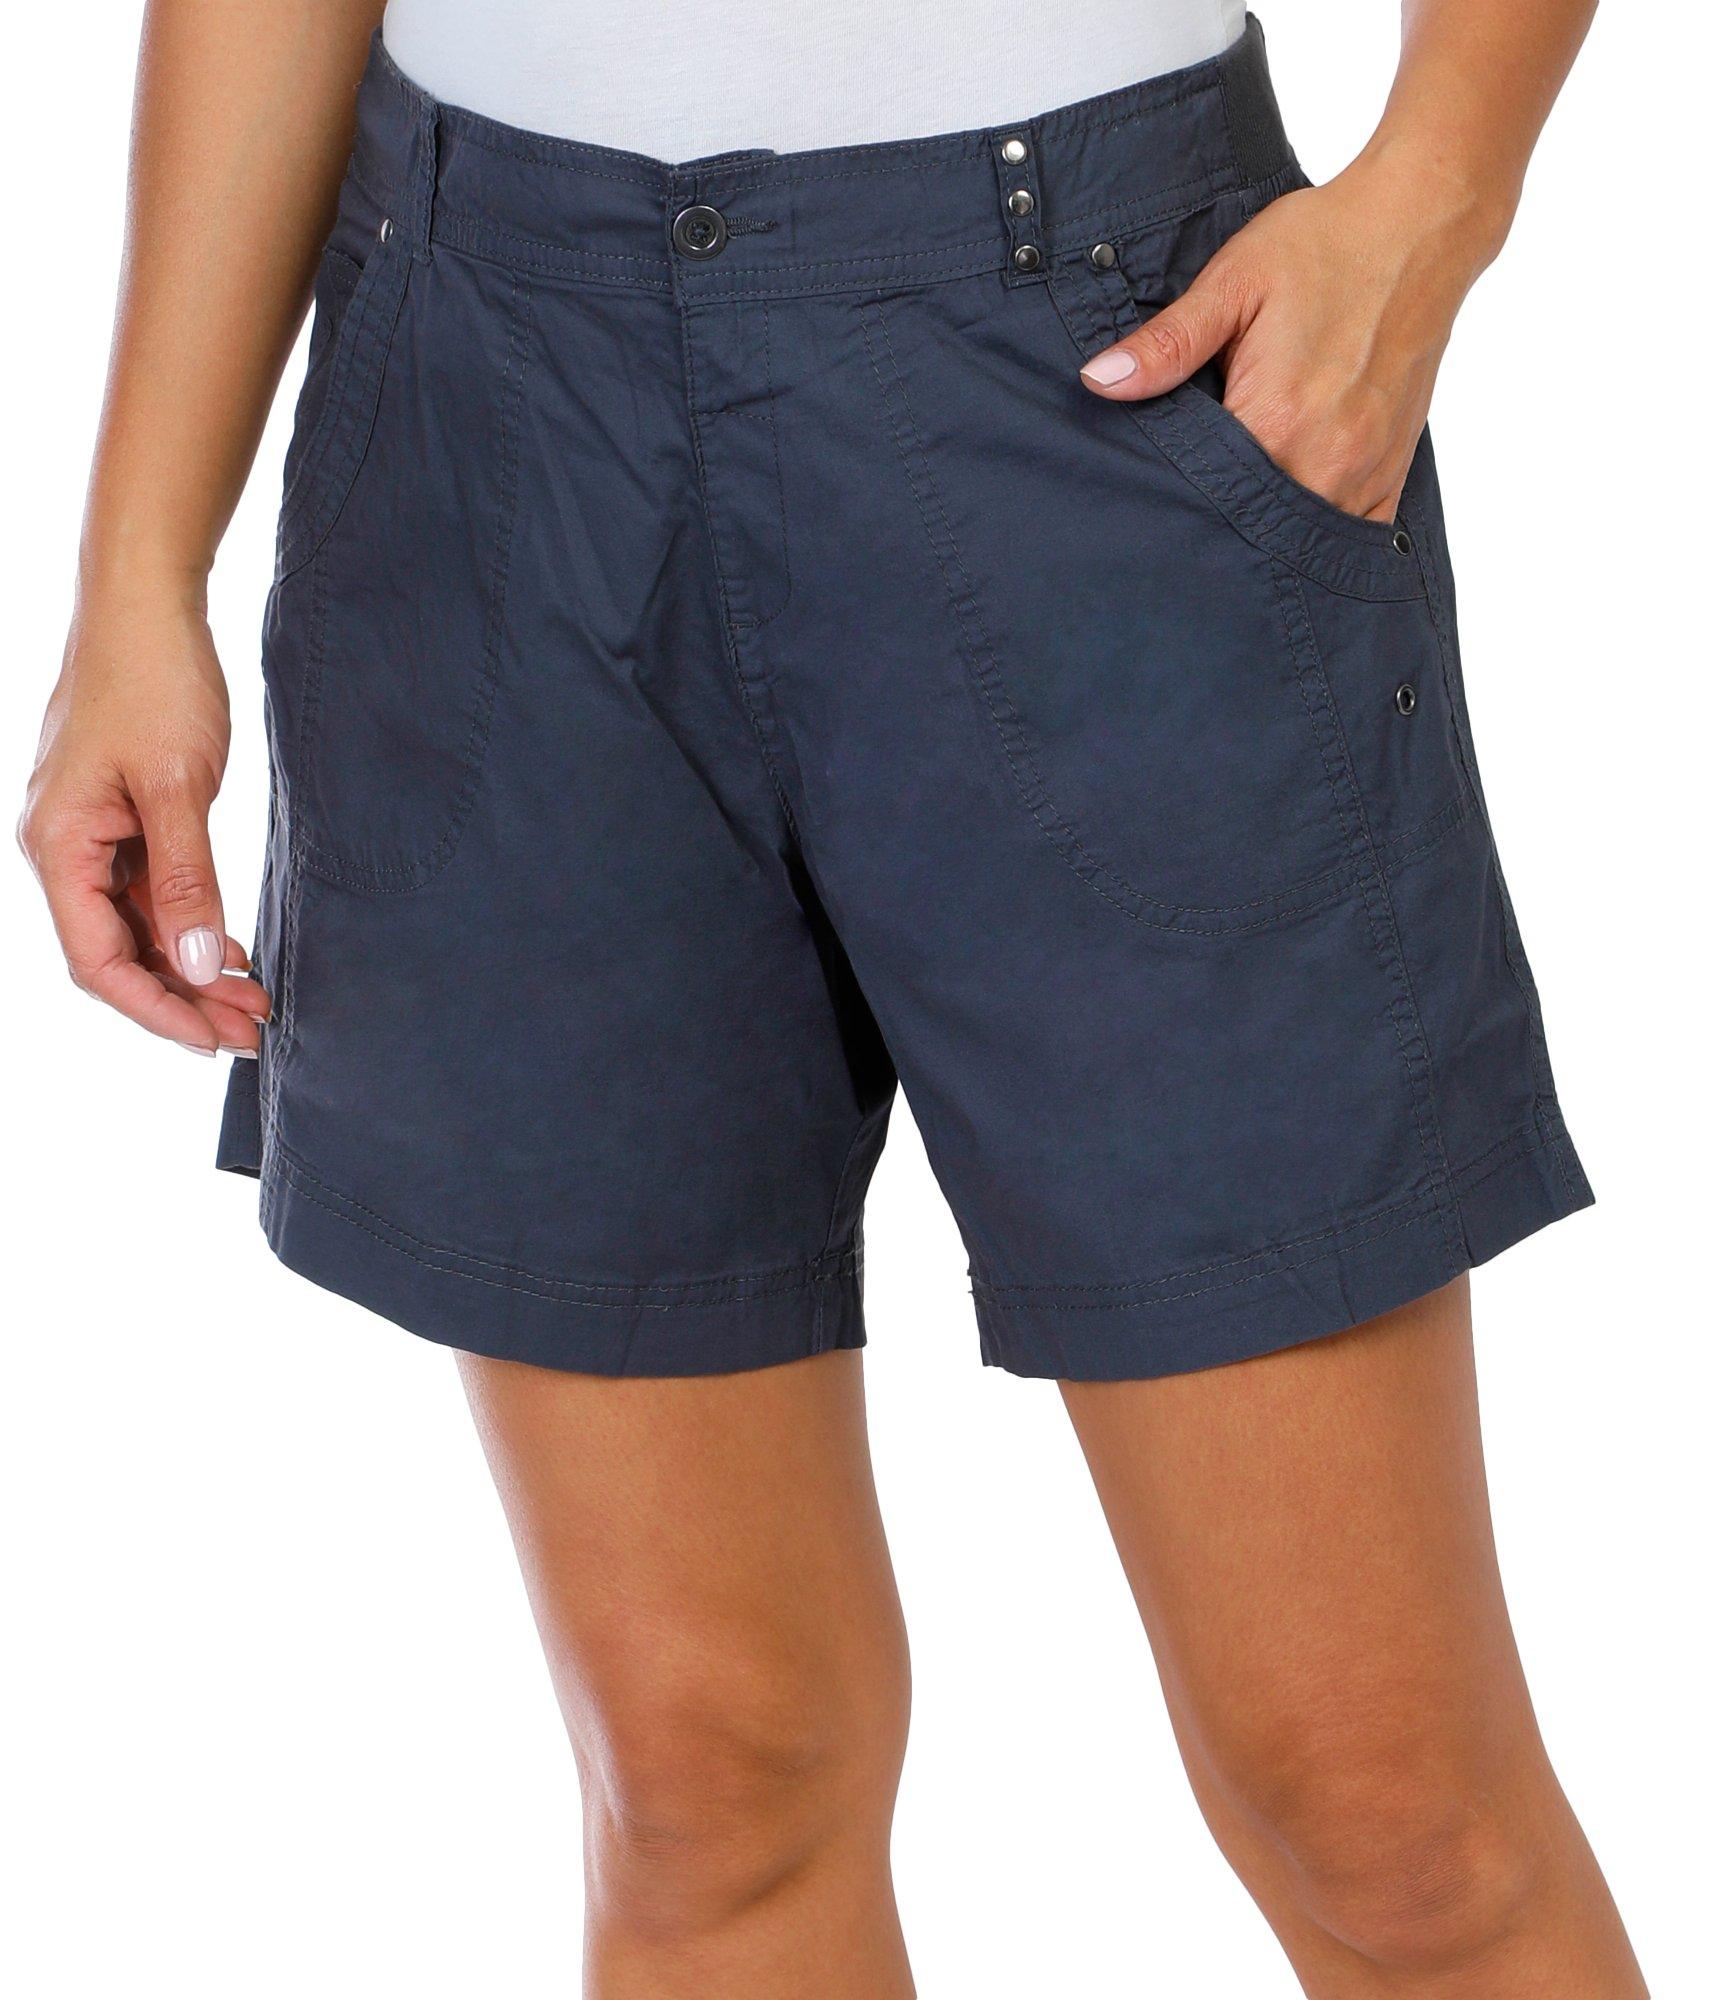 Women's Solid Casual Shorts